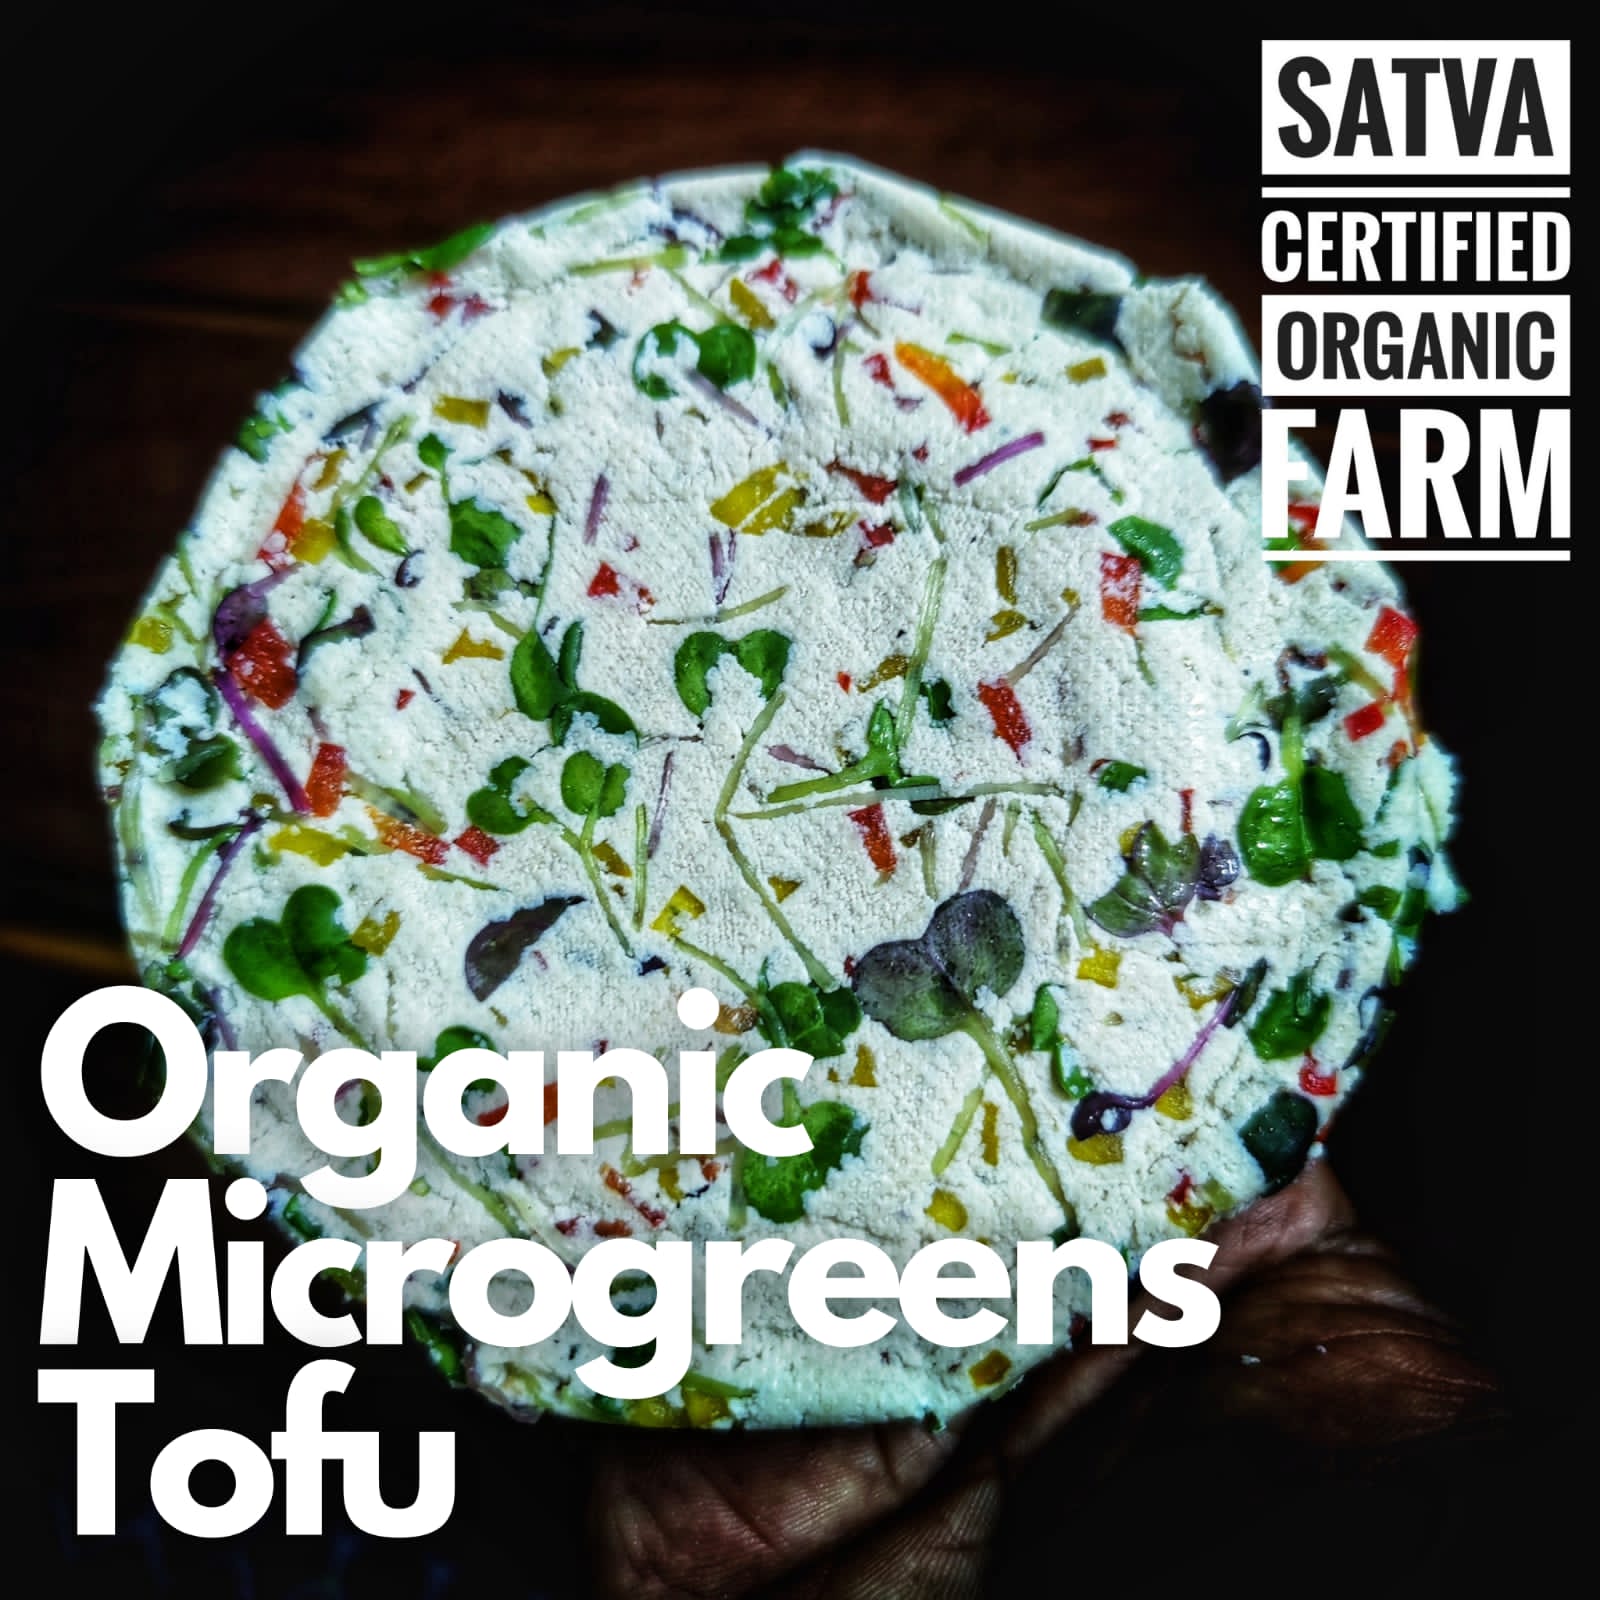 organic Tofu Artisanal Microgreens - Online store for organic products in Bangalore - Native Dairy | Native Dairy & Eggs